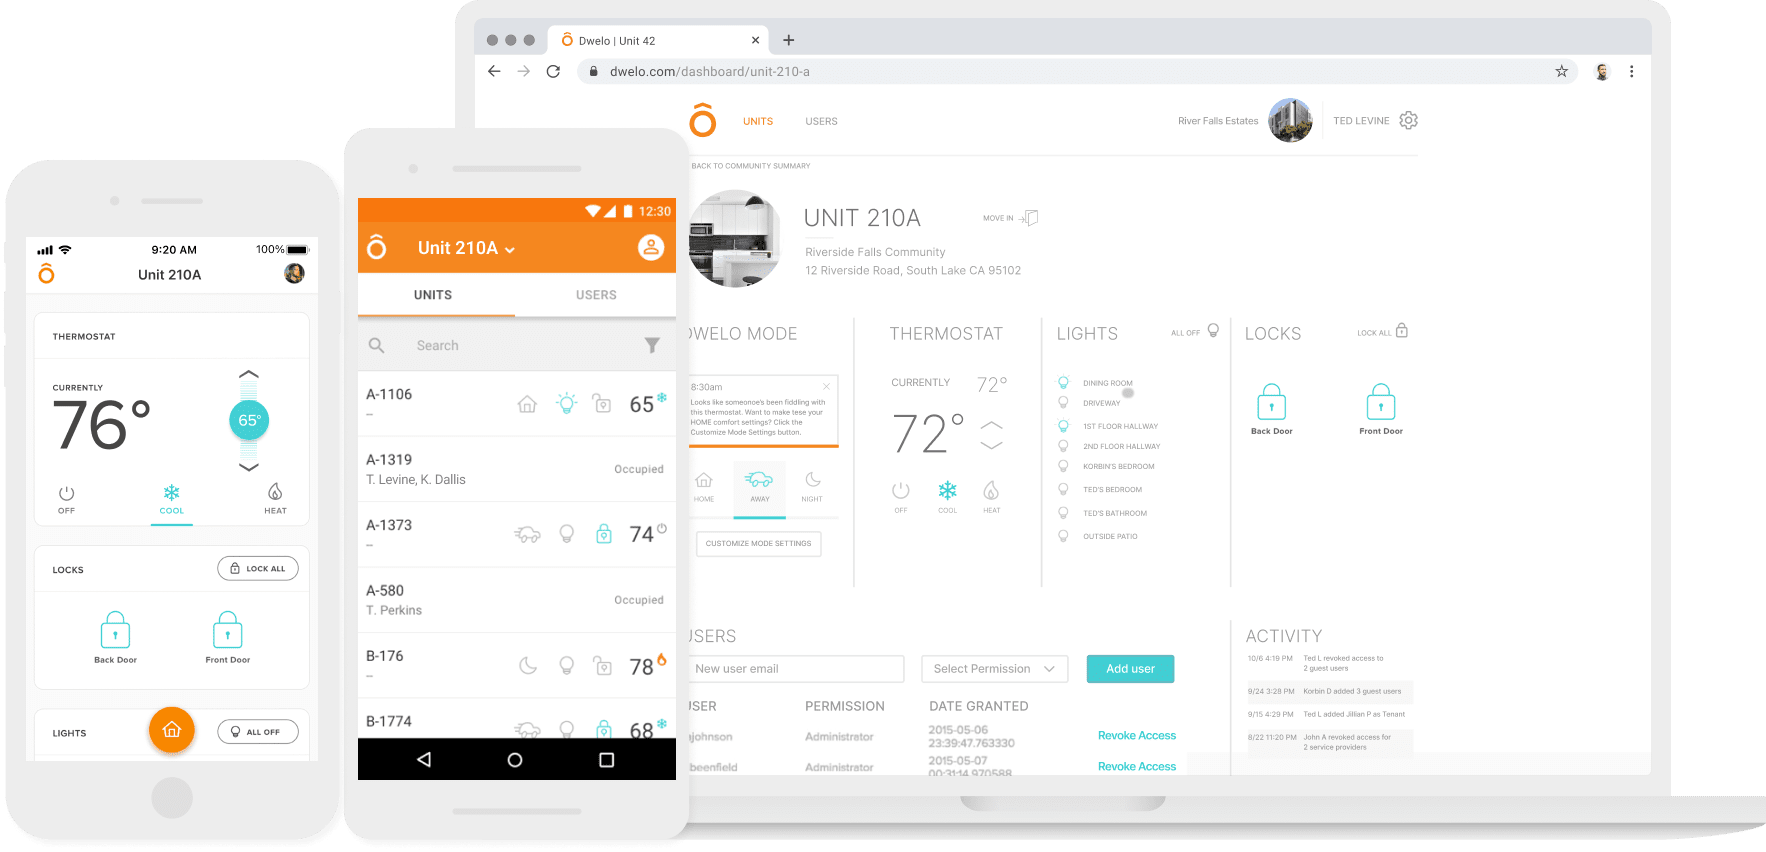 Image showing Dwelo smart home management platform's native apps for iPhone and Android, and the Dwelo website design on a laptop.